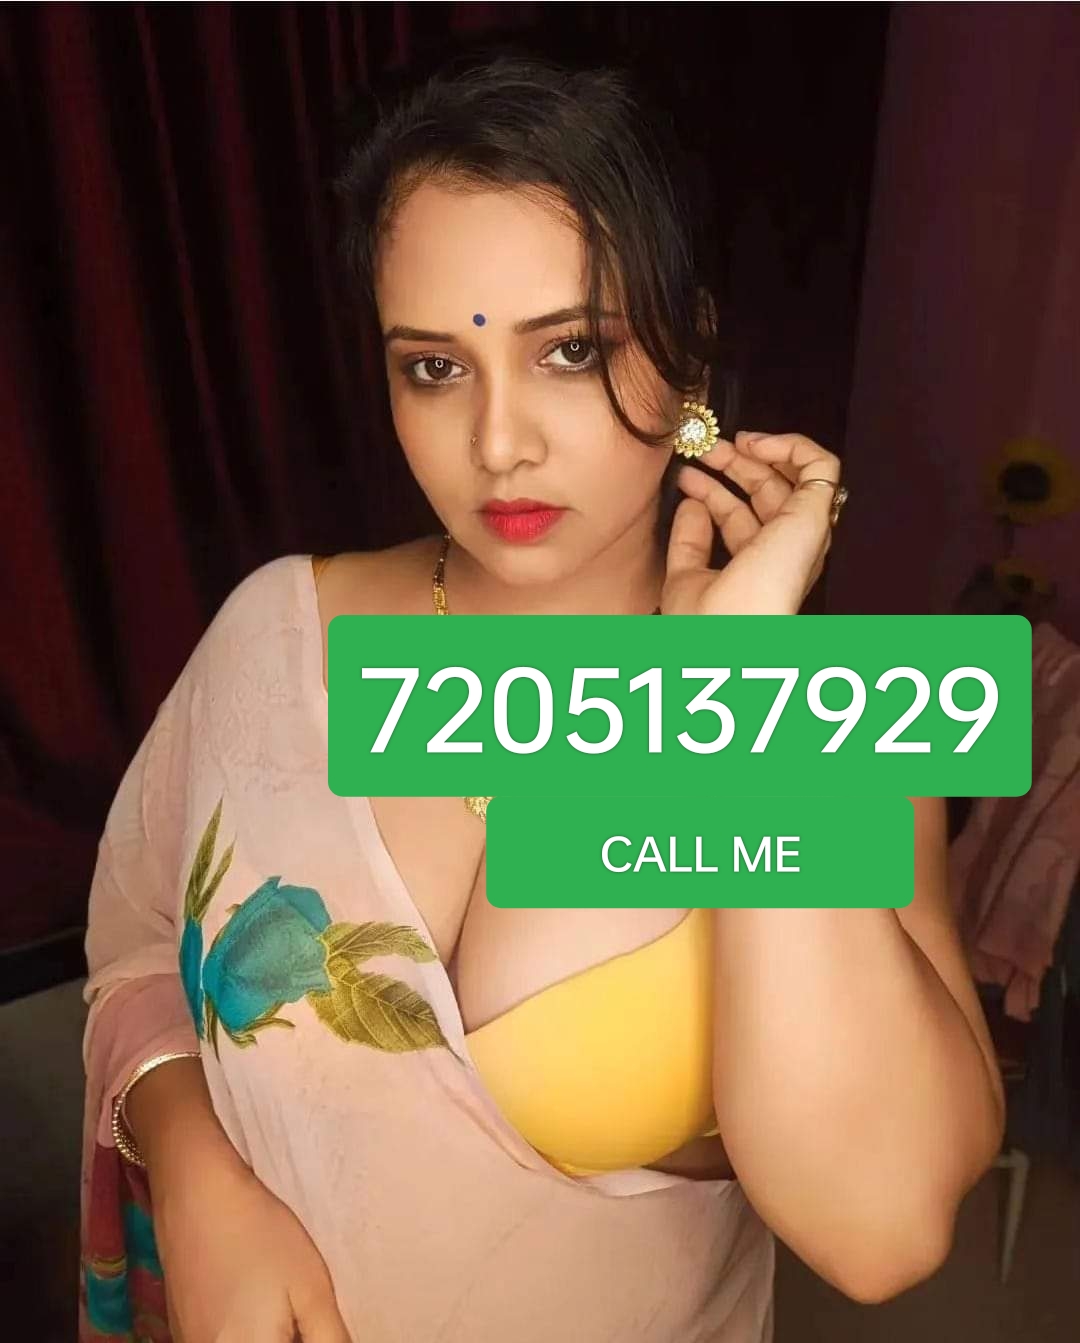 BERHAMPUR CALL GIRL IN ODIA ONLY HAND TO HAND CASH PAYMENT 